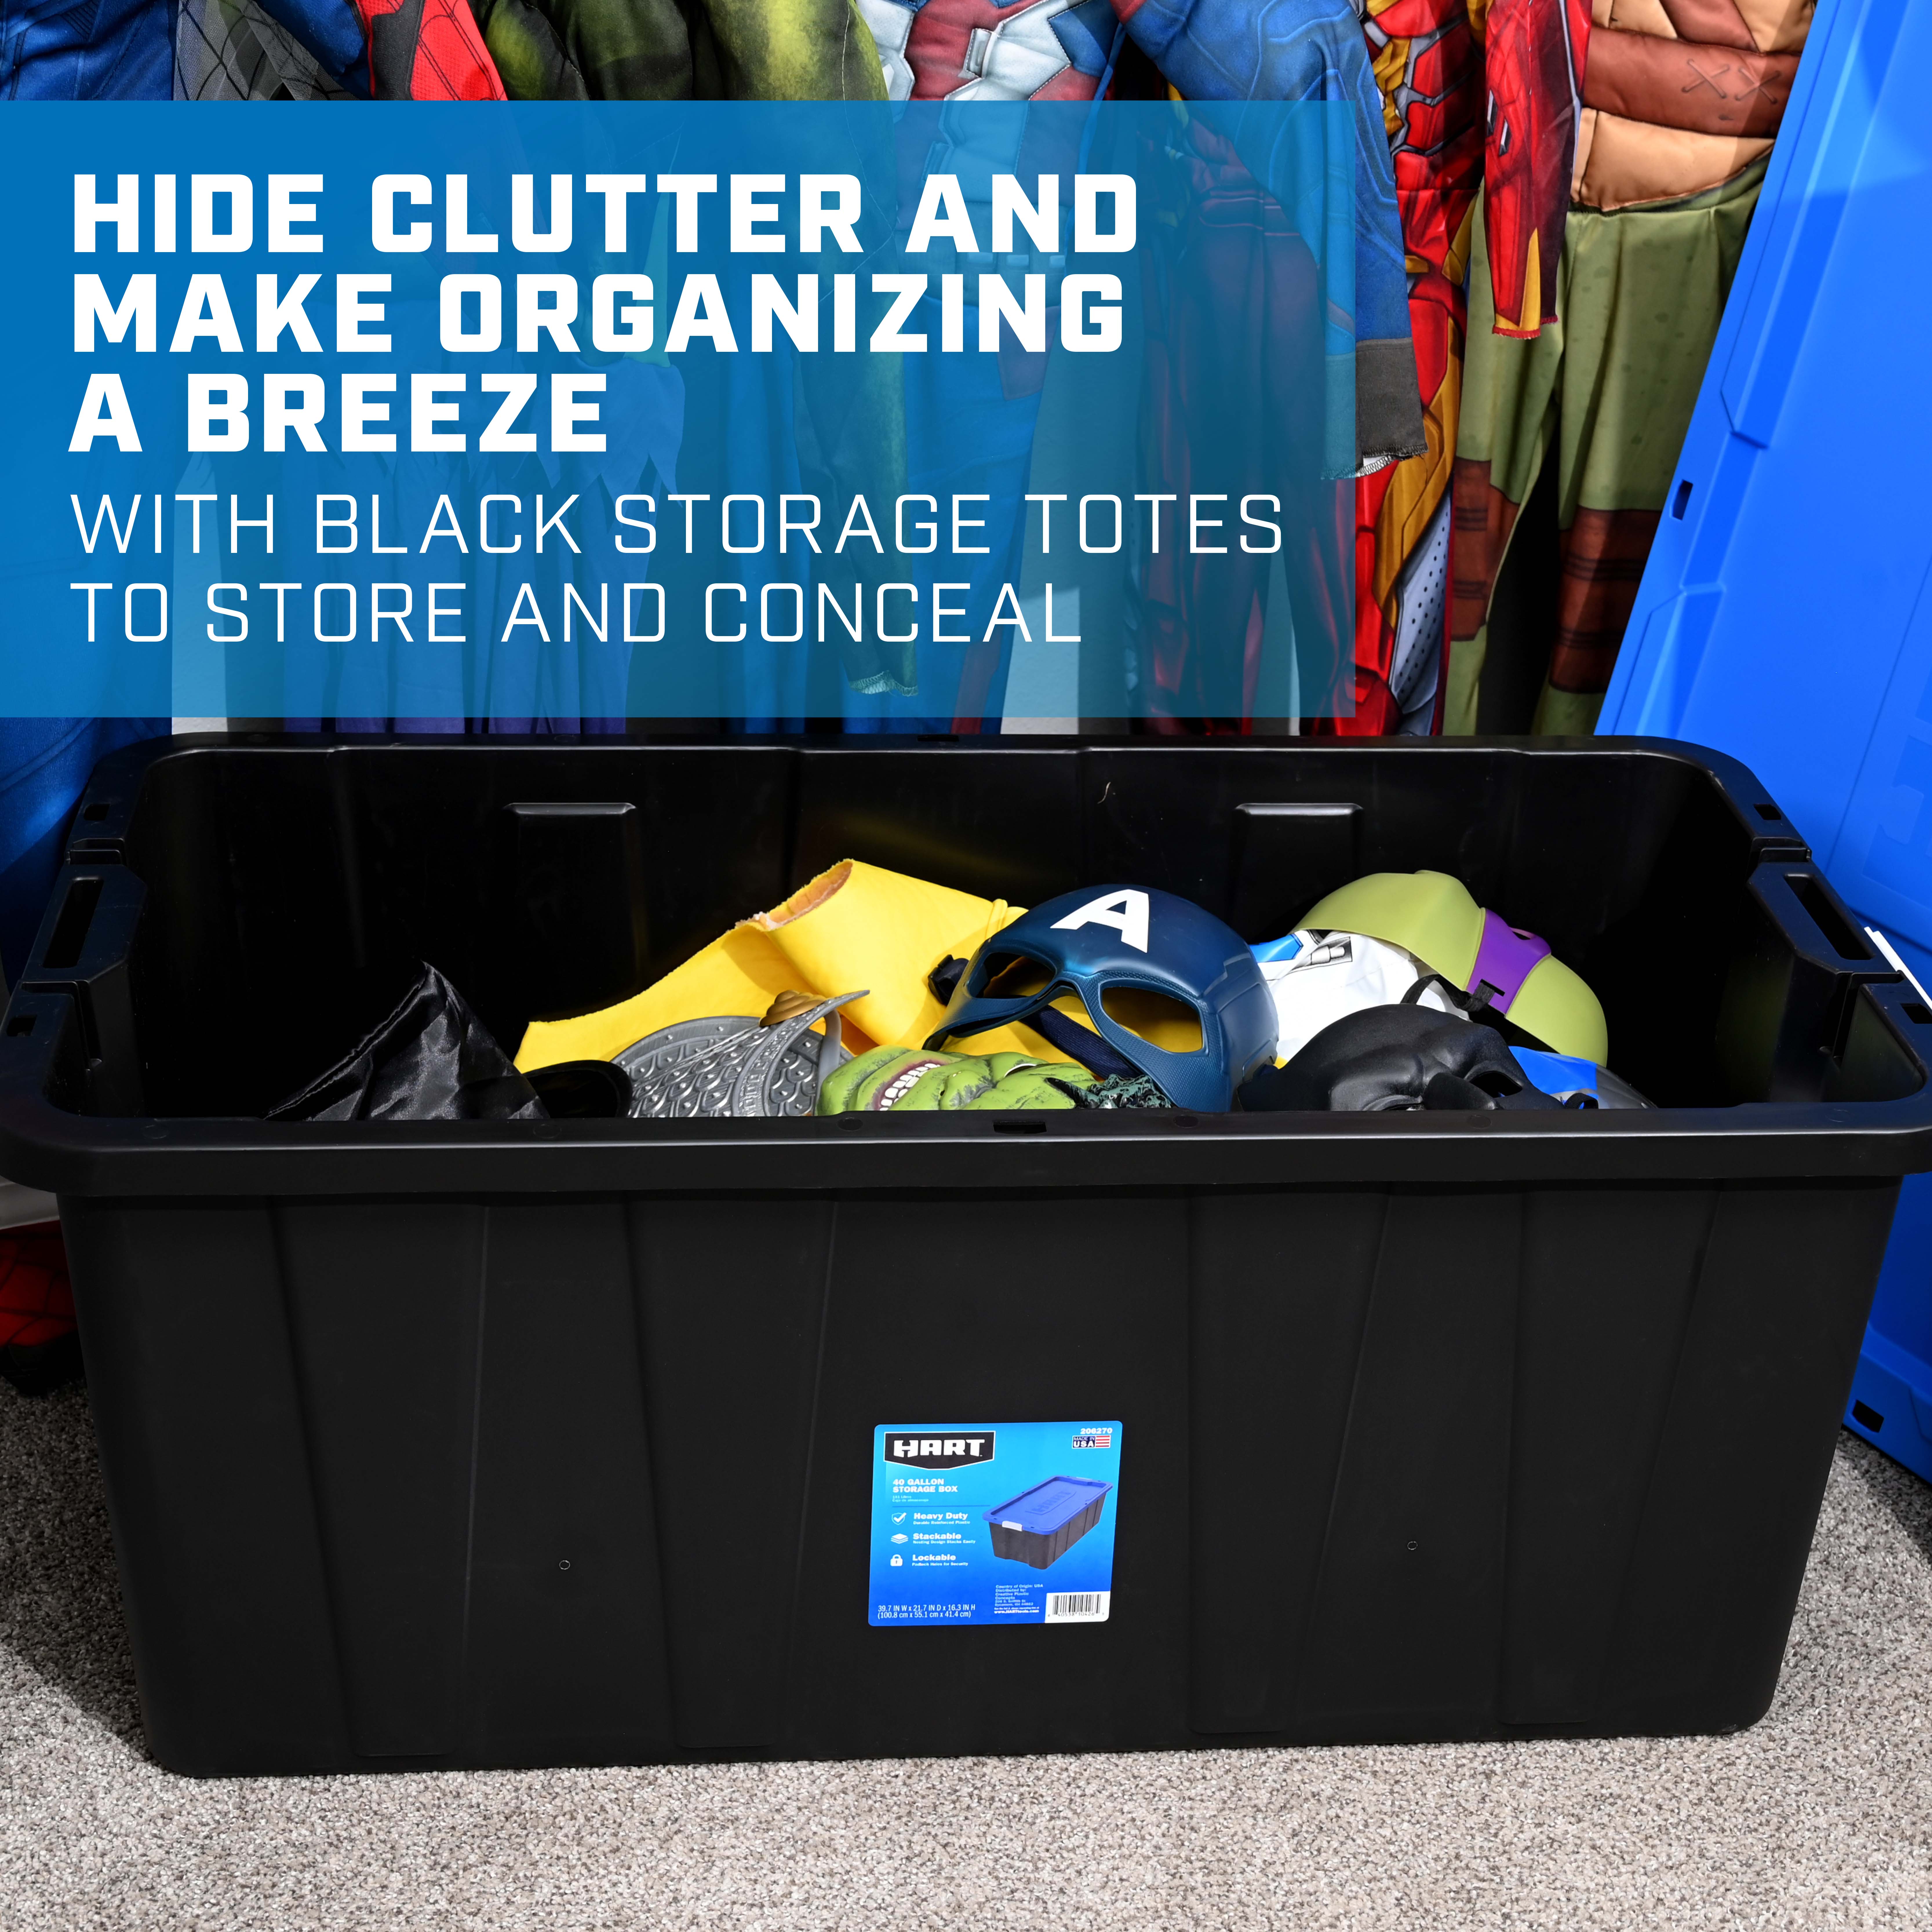 hide clutter and make organizing a breeze with black storage totes to store and conceal